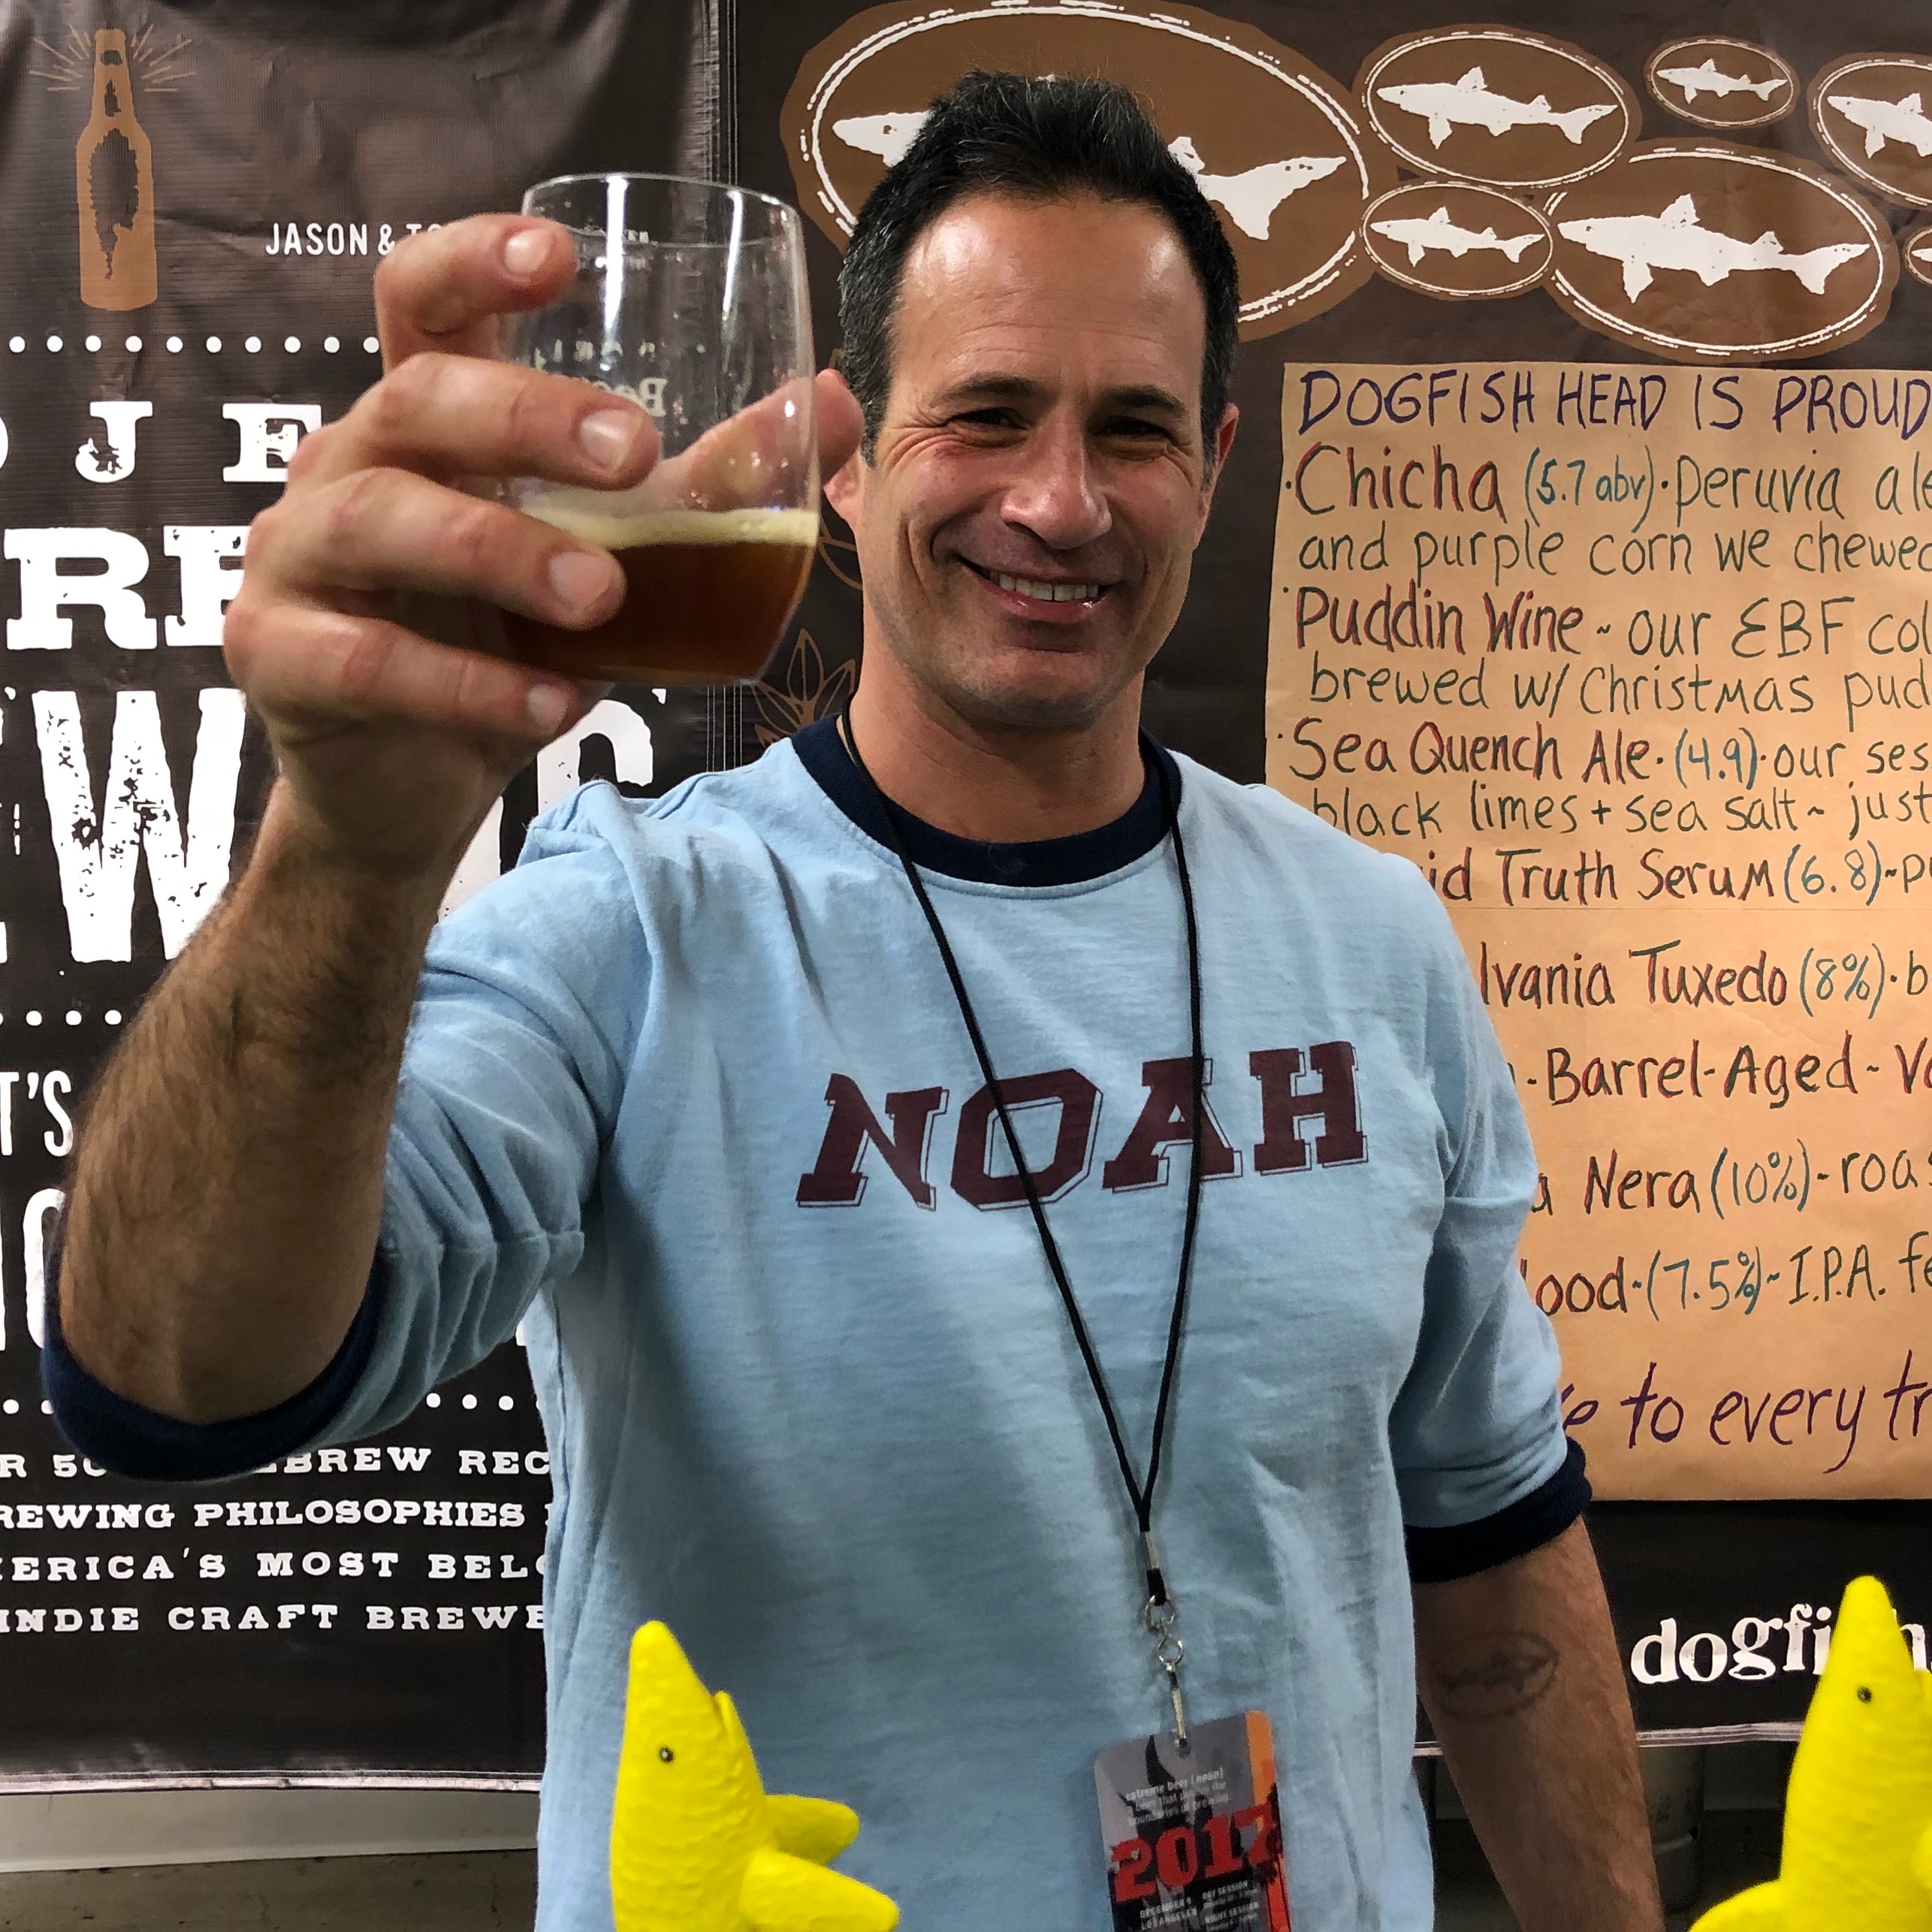 Sam Calagione from Dogfish Head at BeerAdvocate Extreme Beer Fest in Los Angeles.